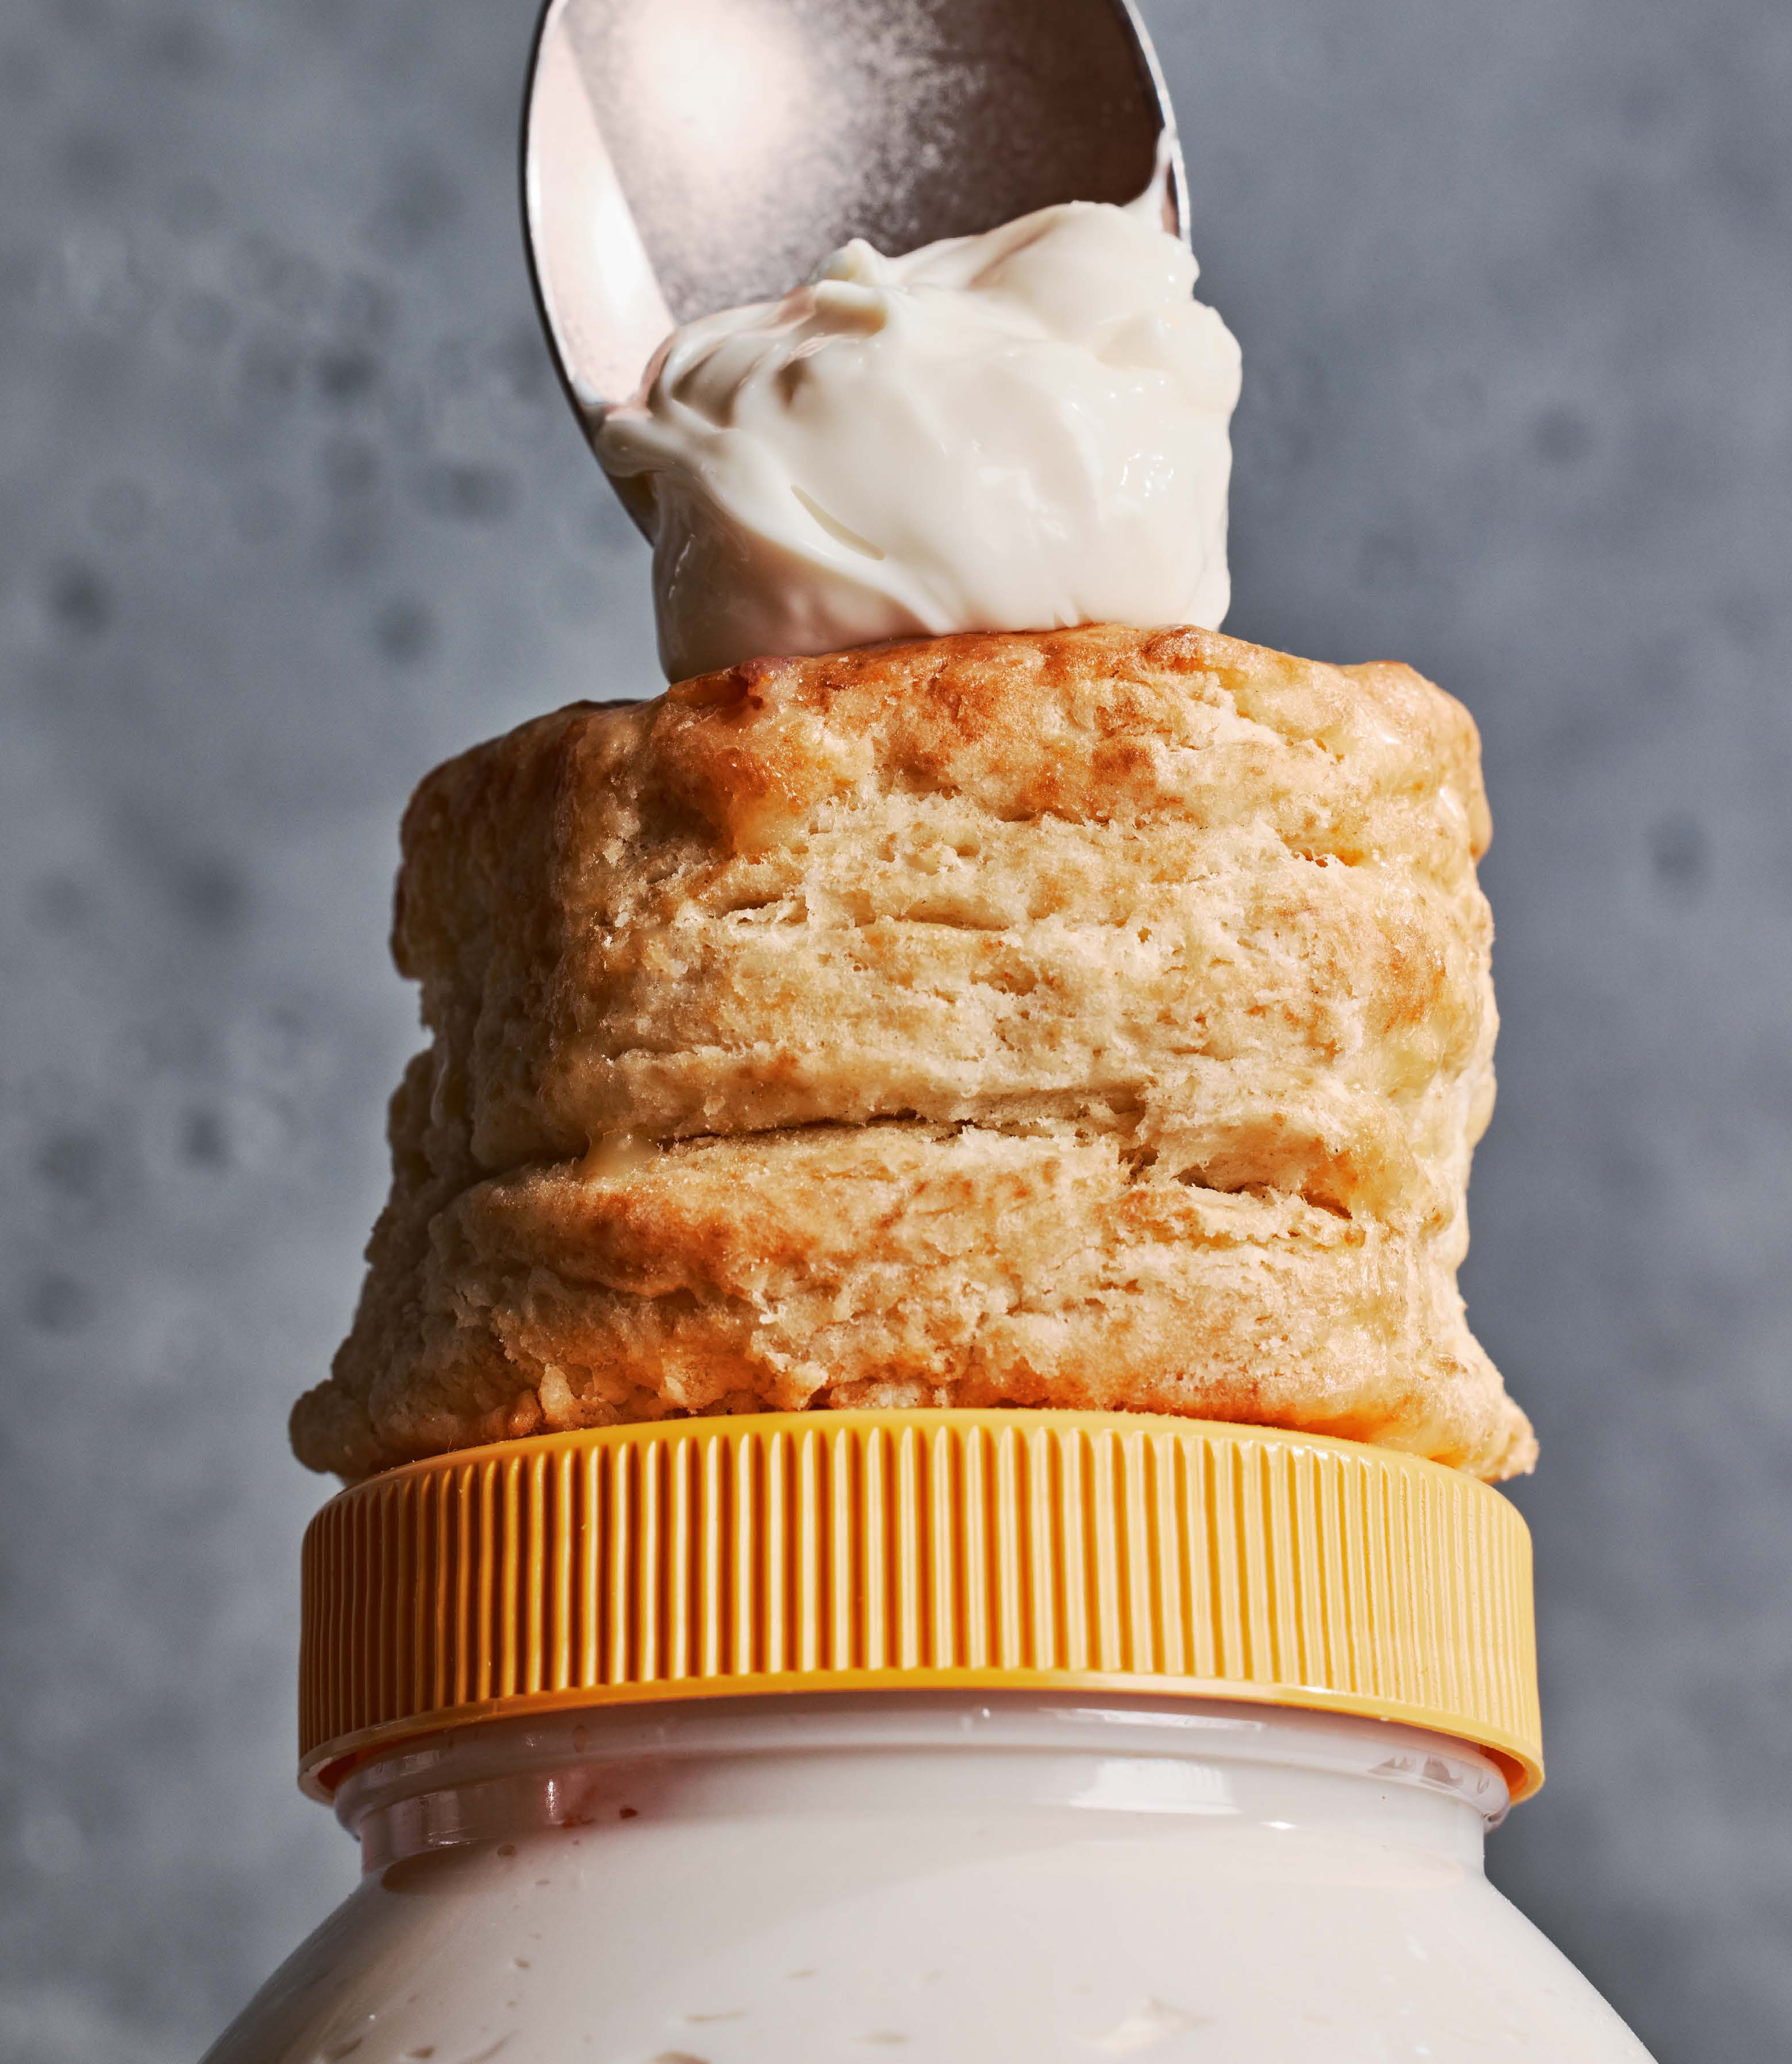 Mayonnaise is spooned onto a biscuit that sits on top of a jar of mayonnaise.